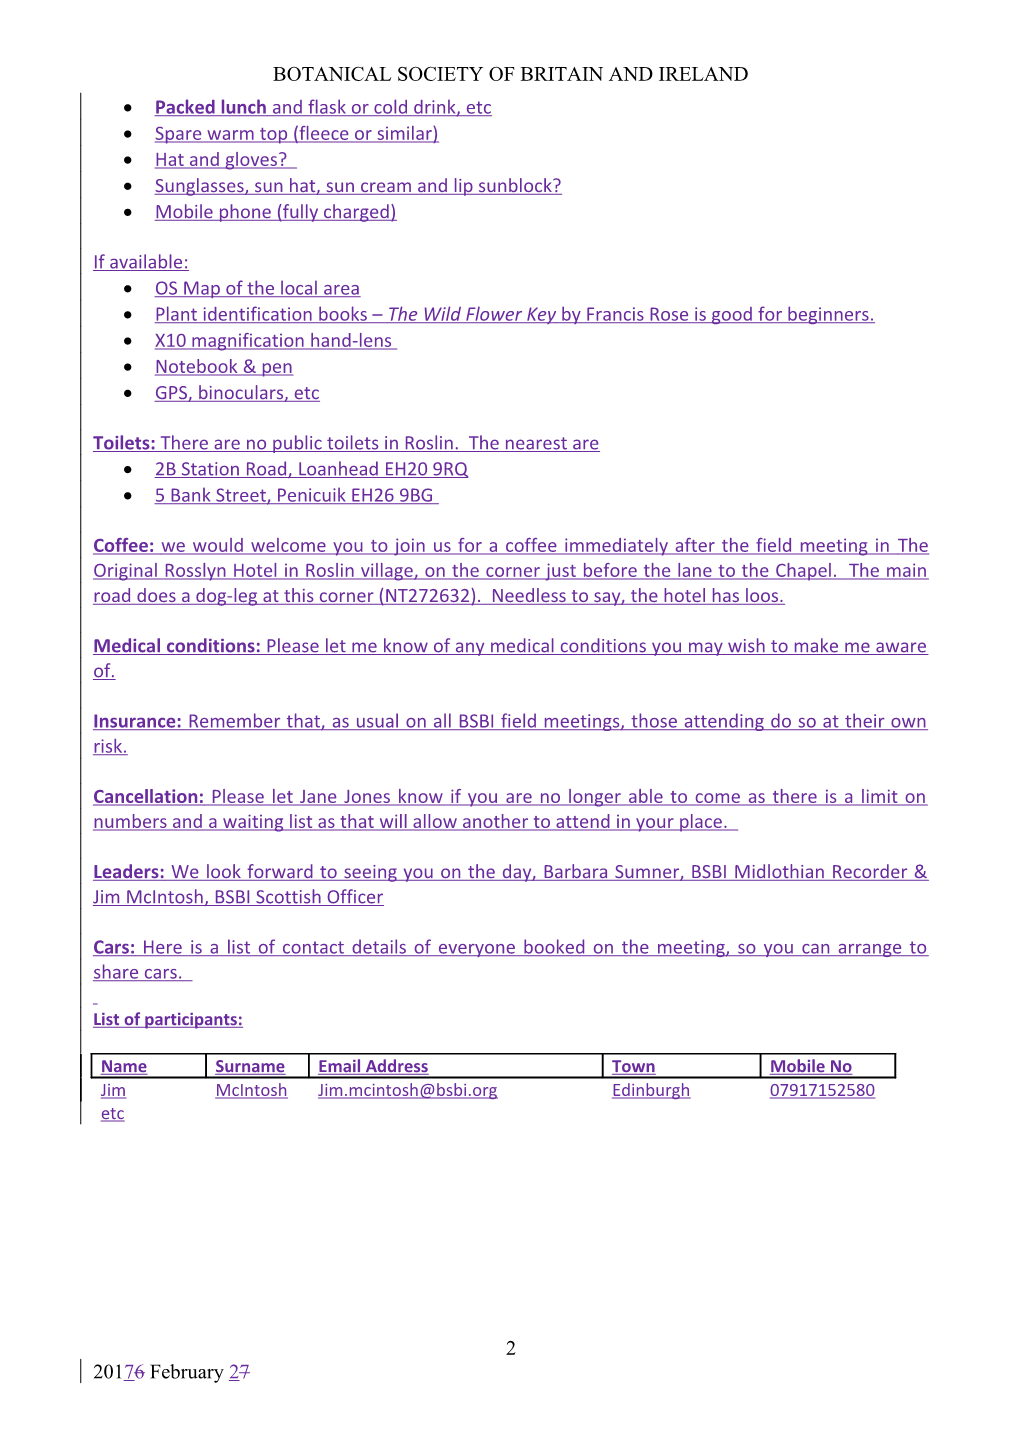 Example of Field Meeting Information Letter